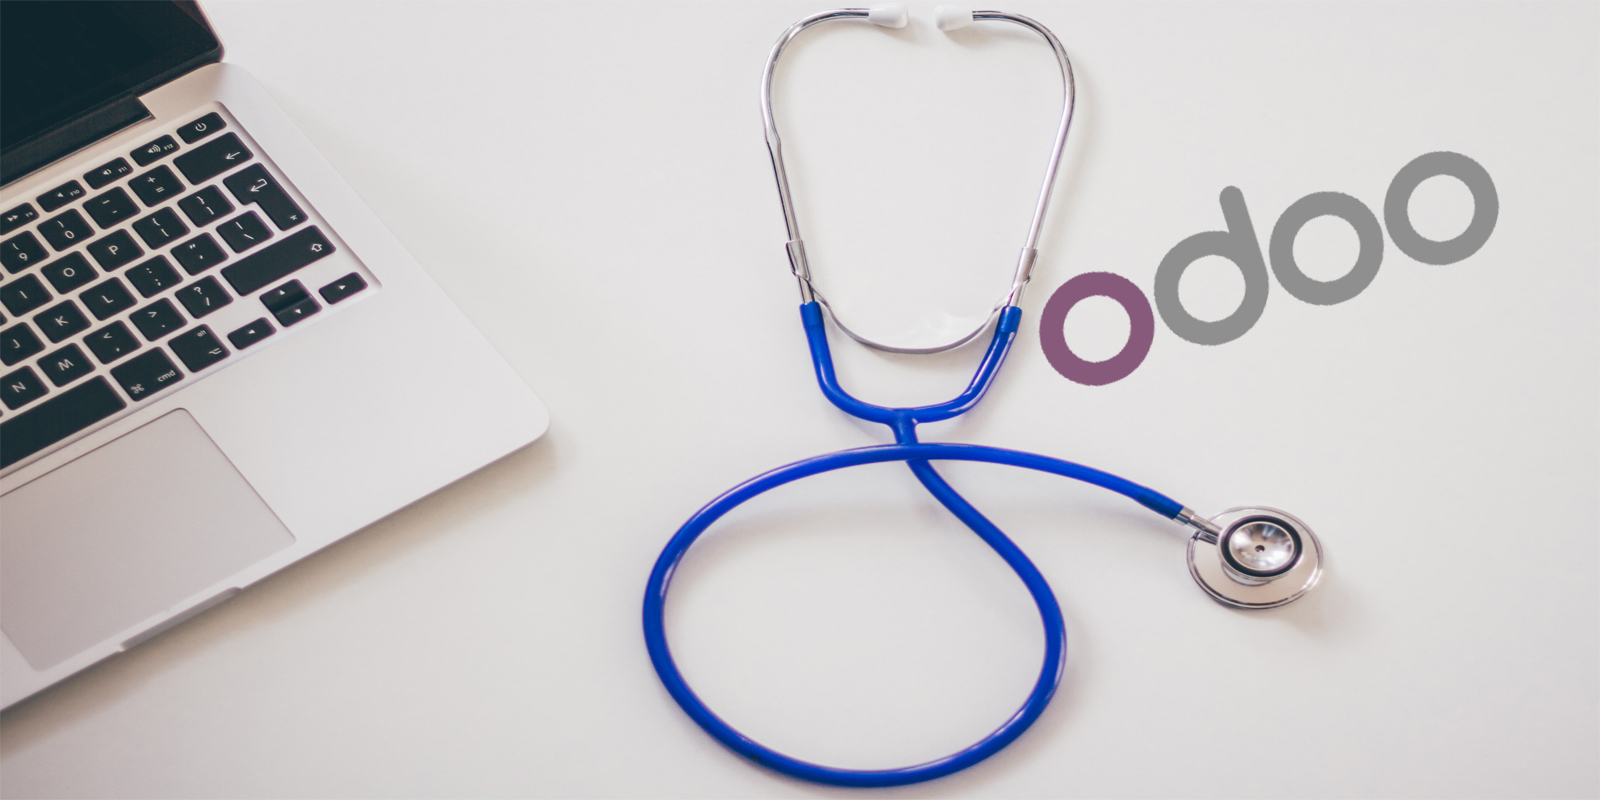 A Look At Odoo Hospital Management System